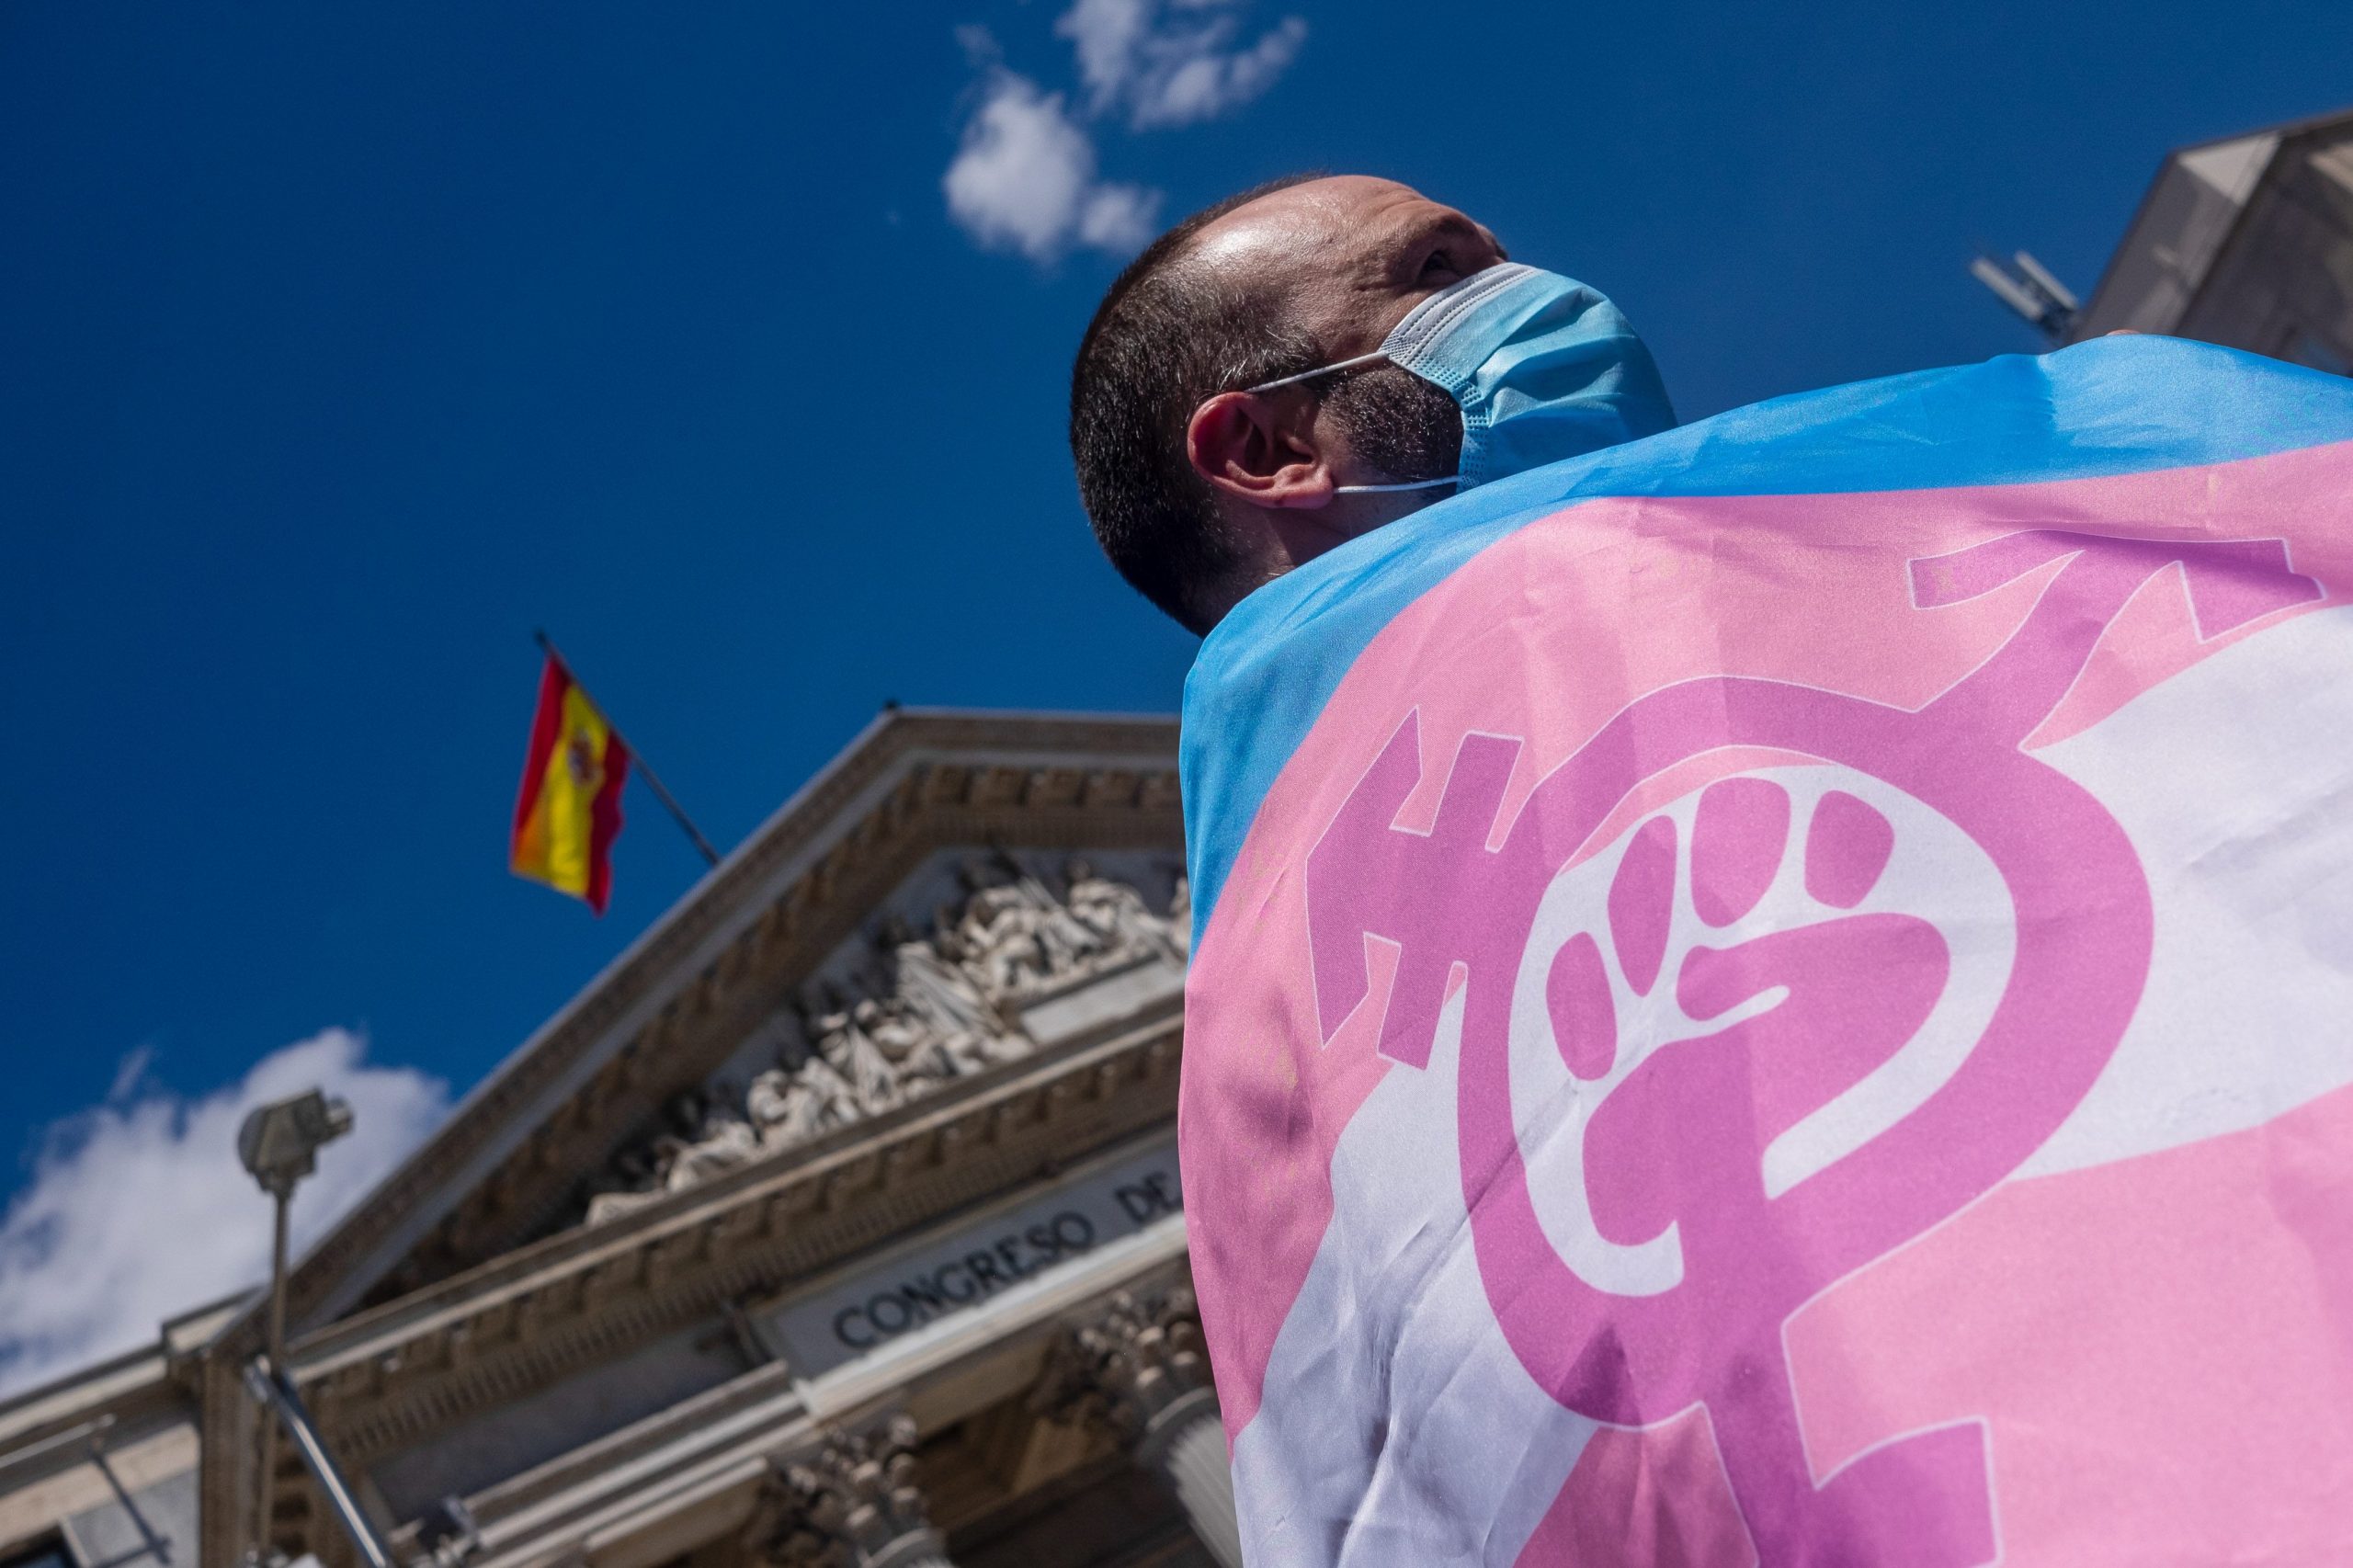 Trans Community Activists Protest Outside The Congress Of Deputies In Madrid, Spain 18 May 2021